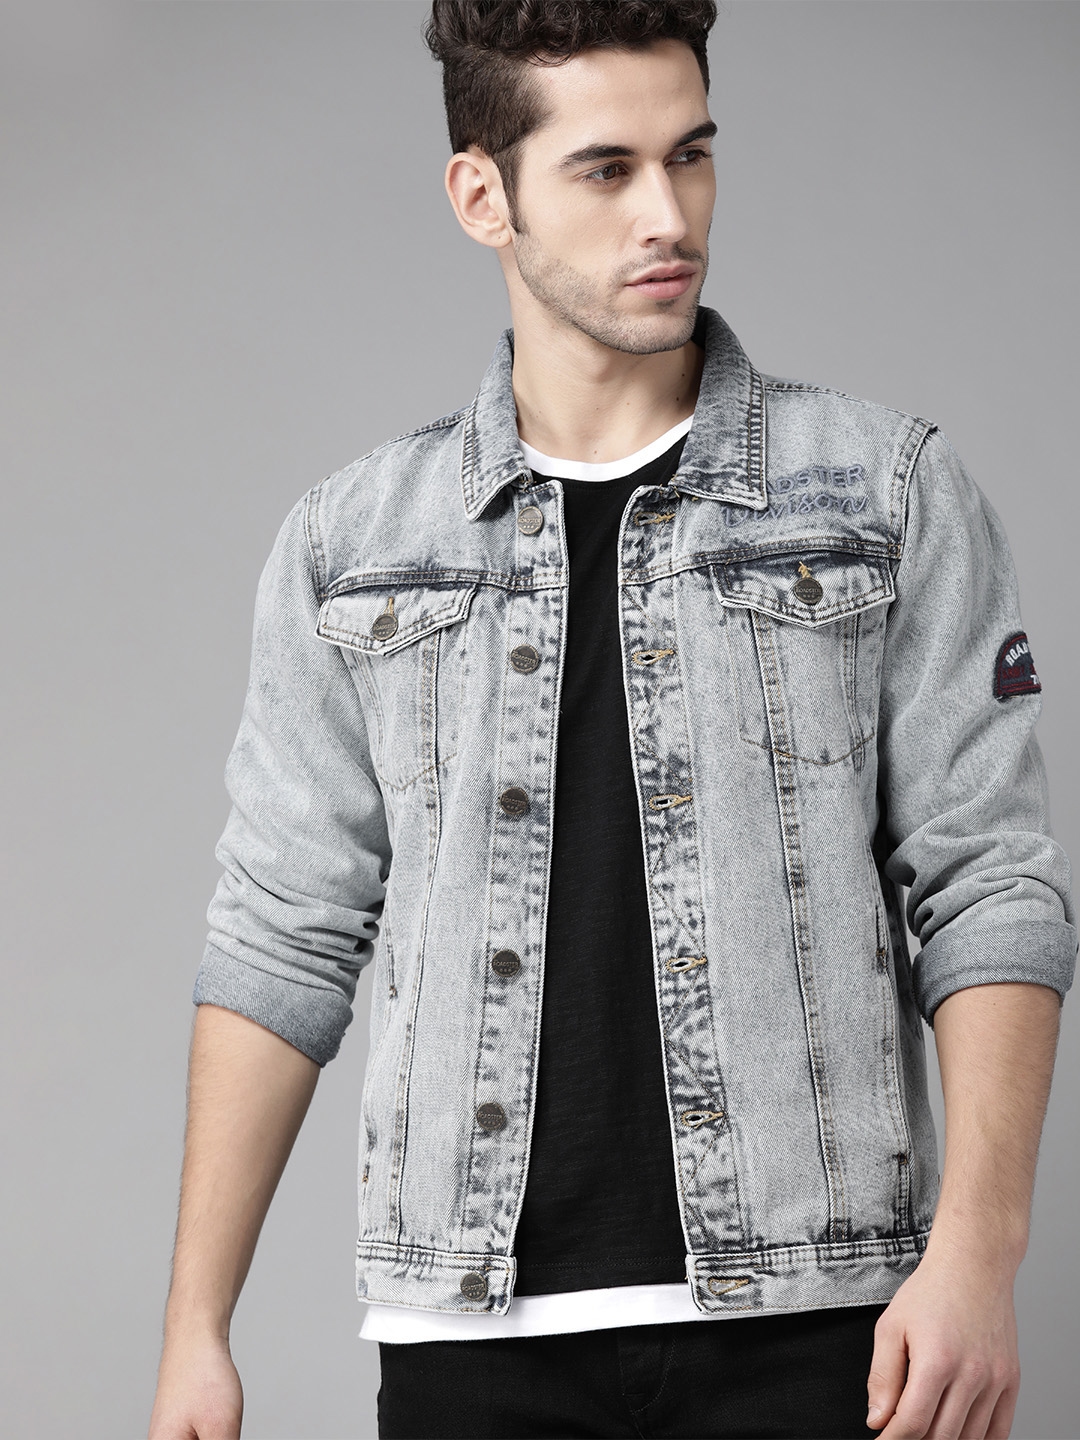 Cotton Men Jeans Jacket at Rs 700/piece in Saharanpur | ID: 26085085391-anthinhphatland.vn